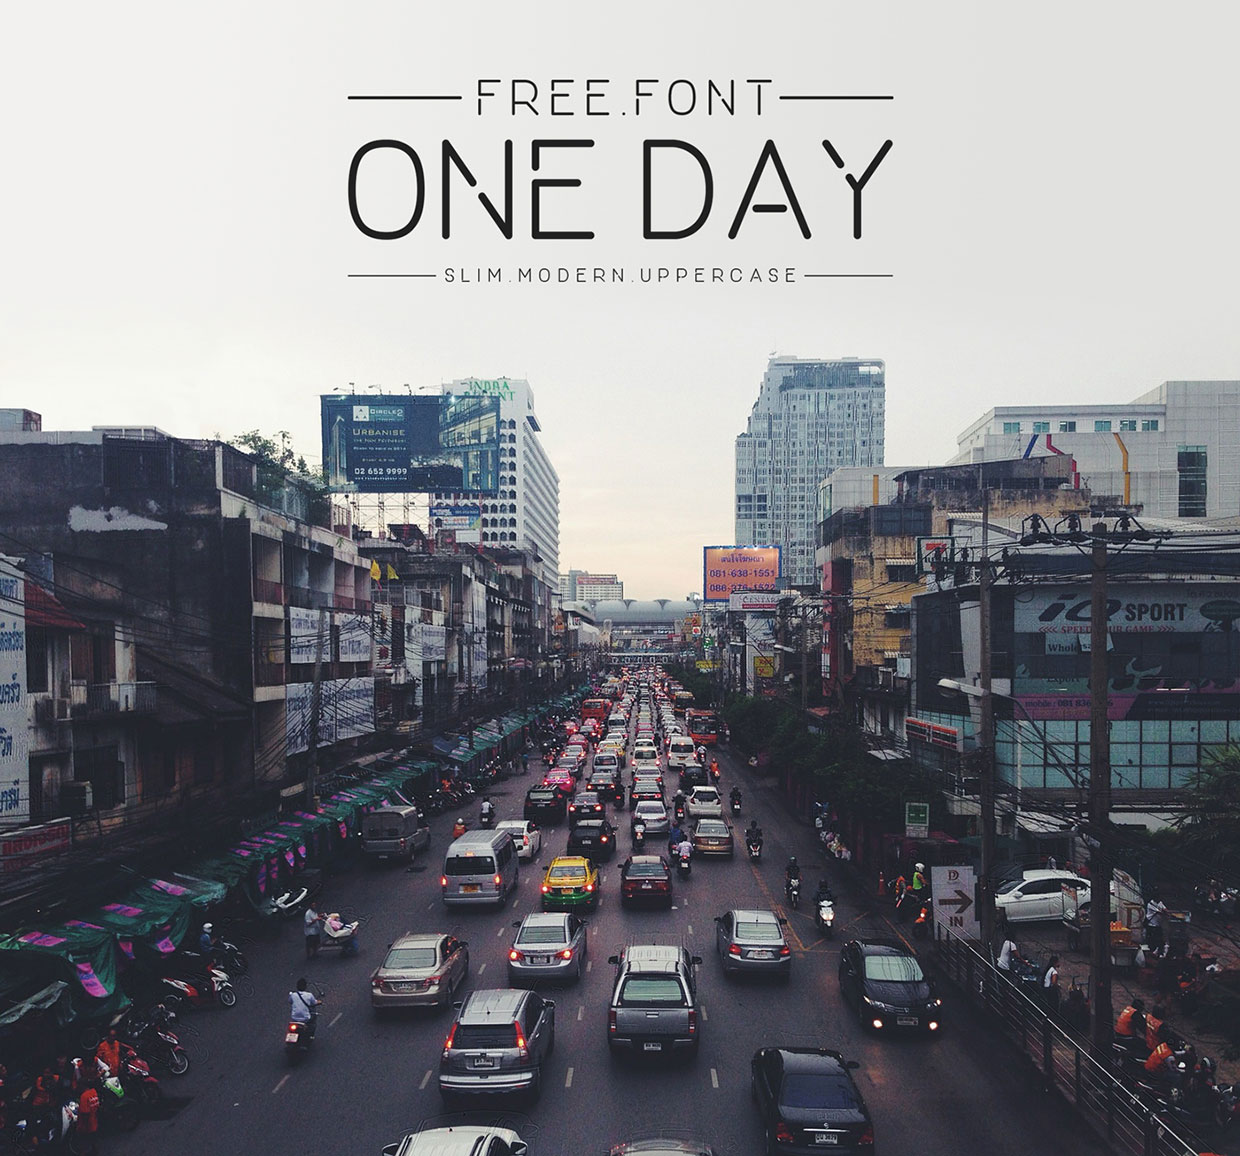 one-day-best-free-logo-fonts-092